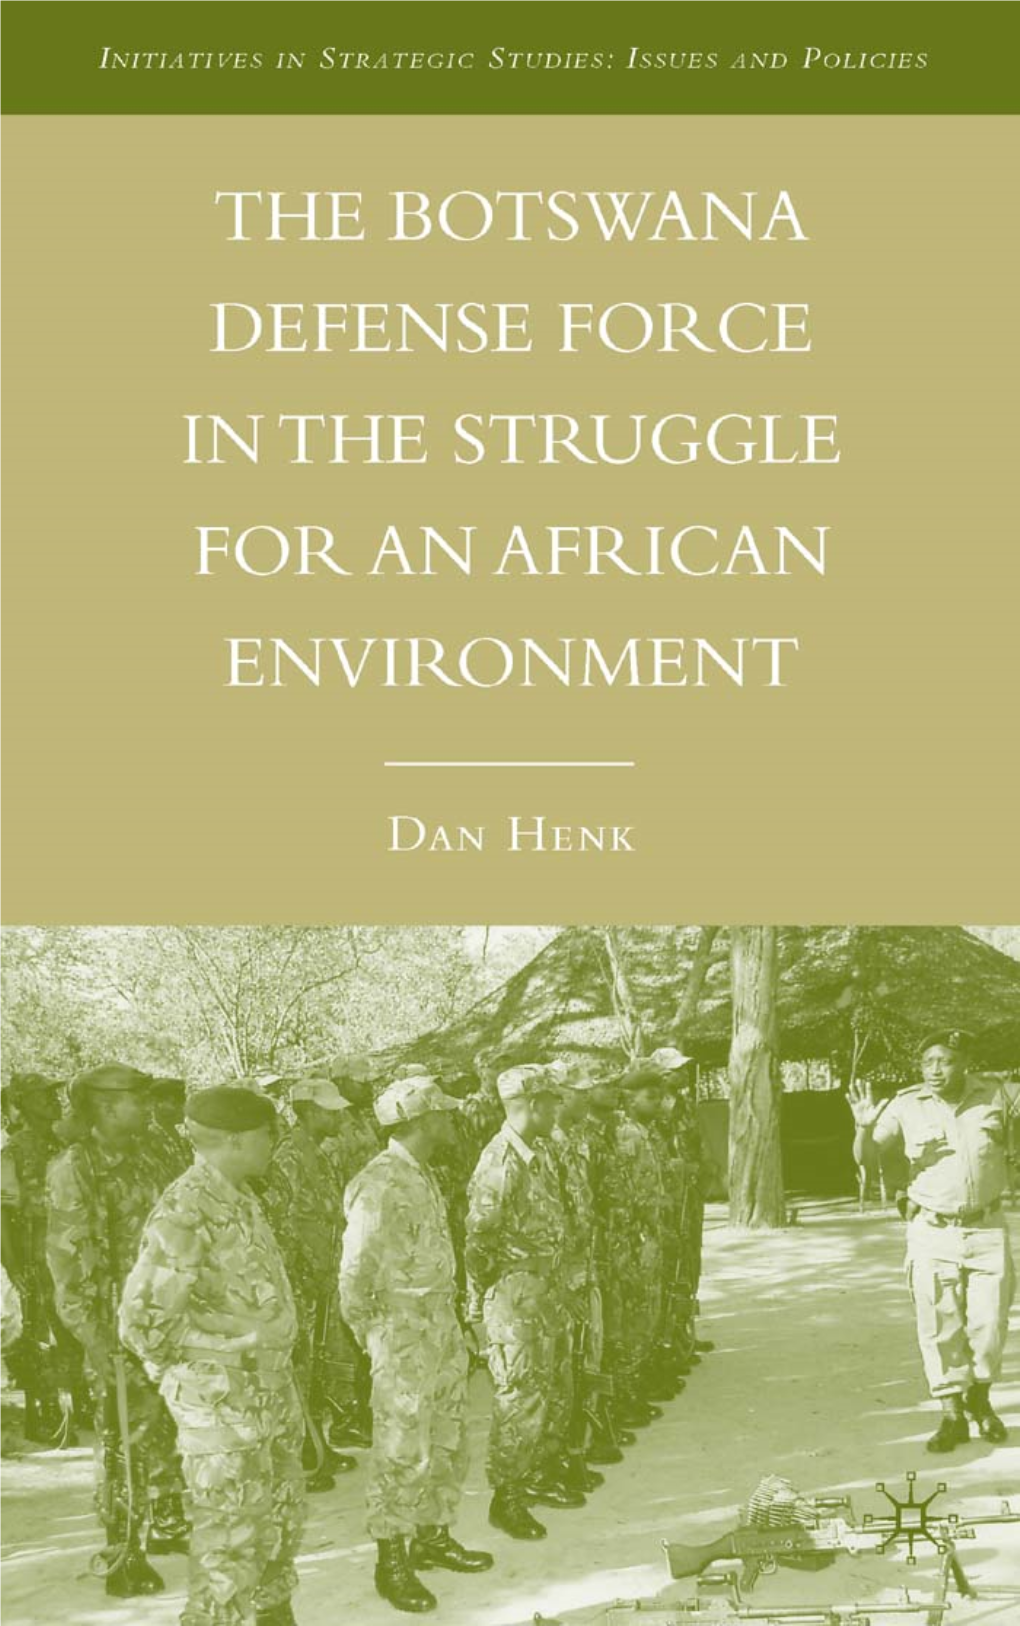 Botswana Defence Force in the Struggle for an African Environment